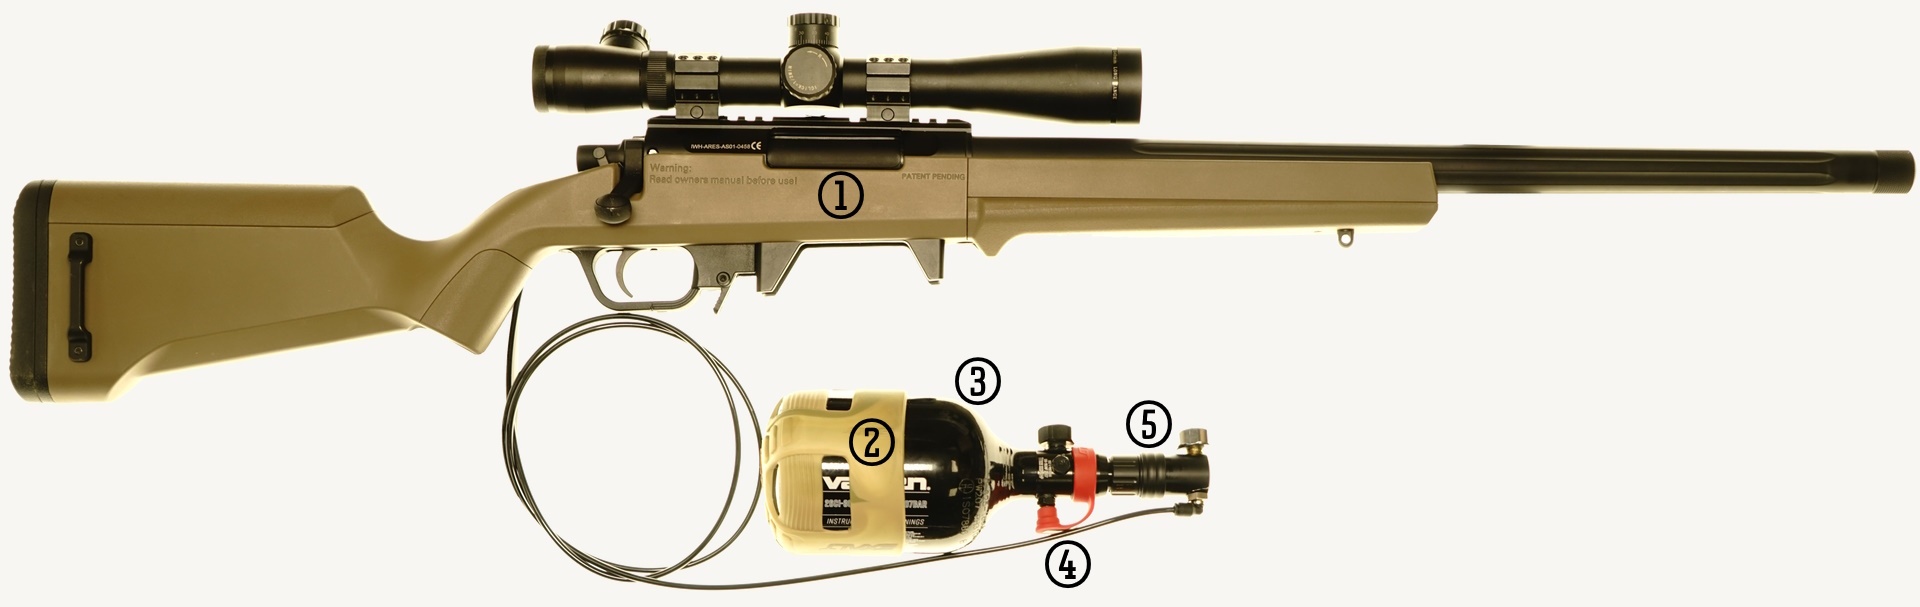 Sniper Mancraft HPA rifle based on Ares Amoeba with SDiK Engine inside. Complete example Mancraft build with Micro HPA Line and Valken HPA Tank.